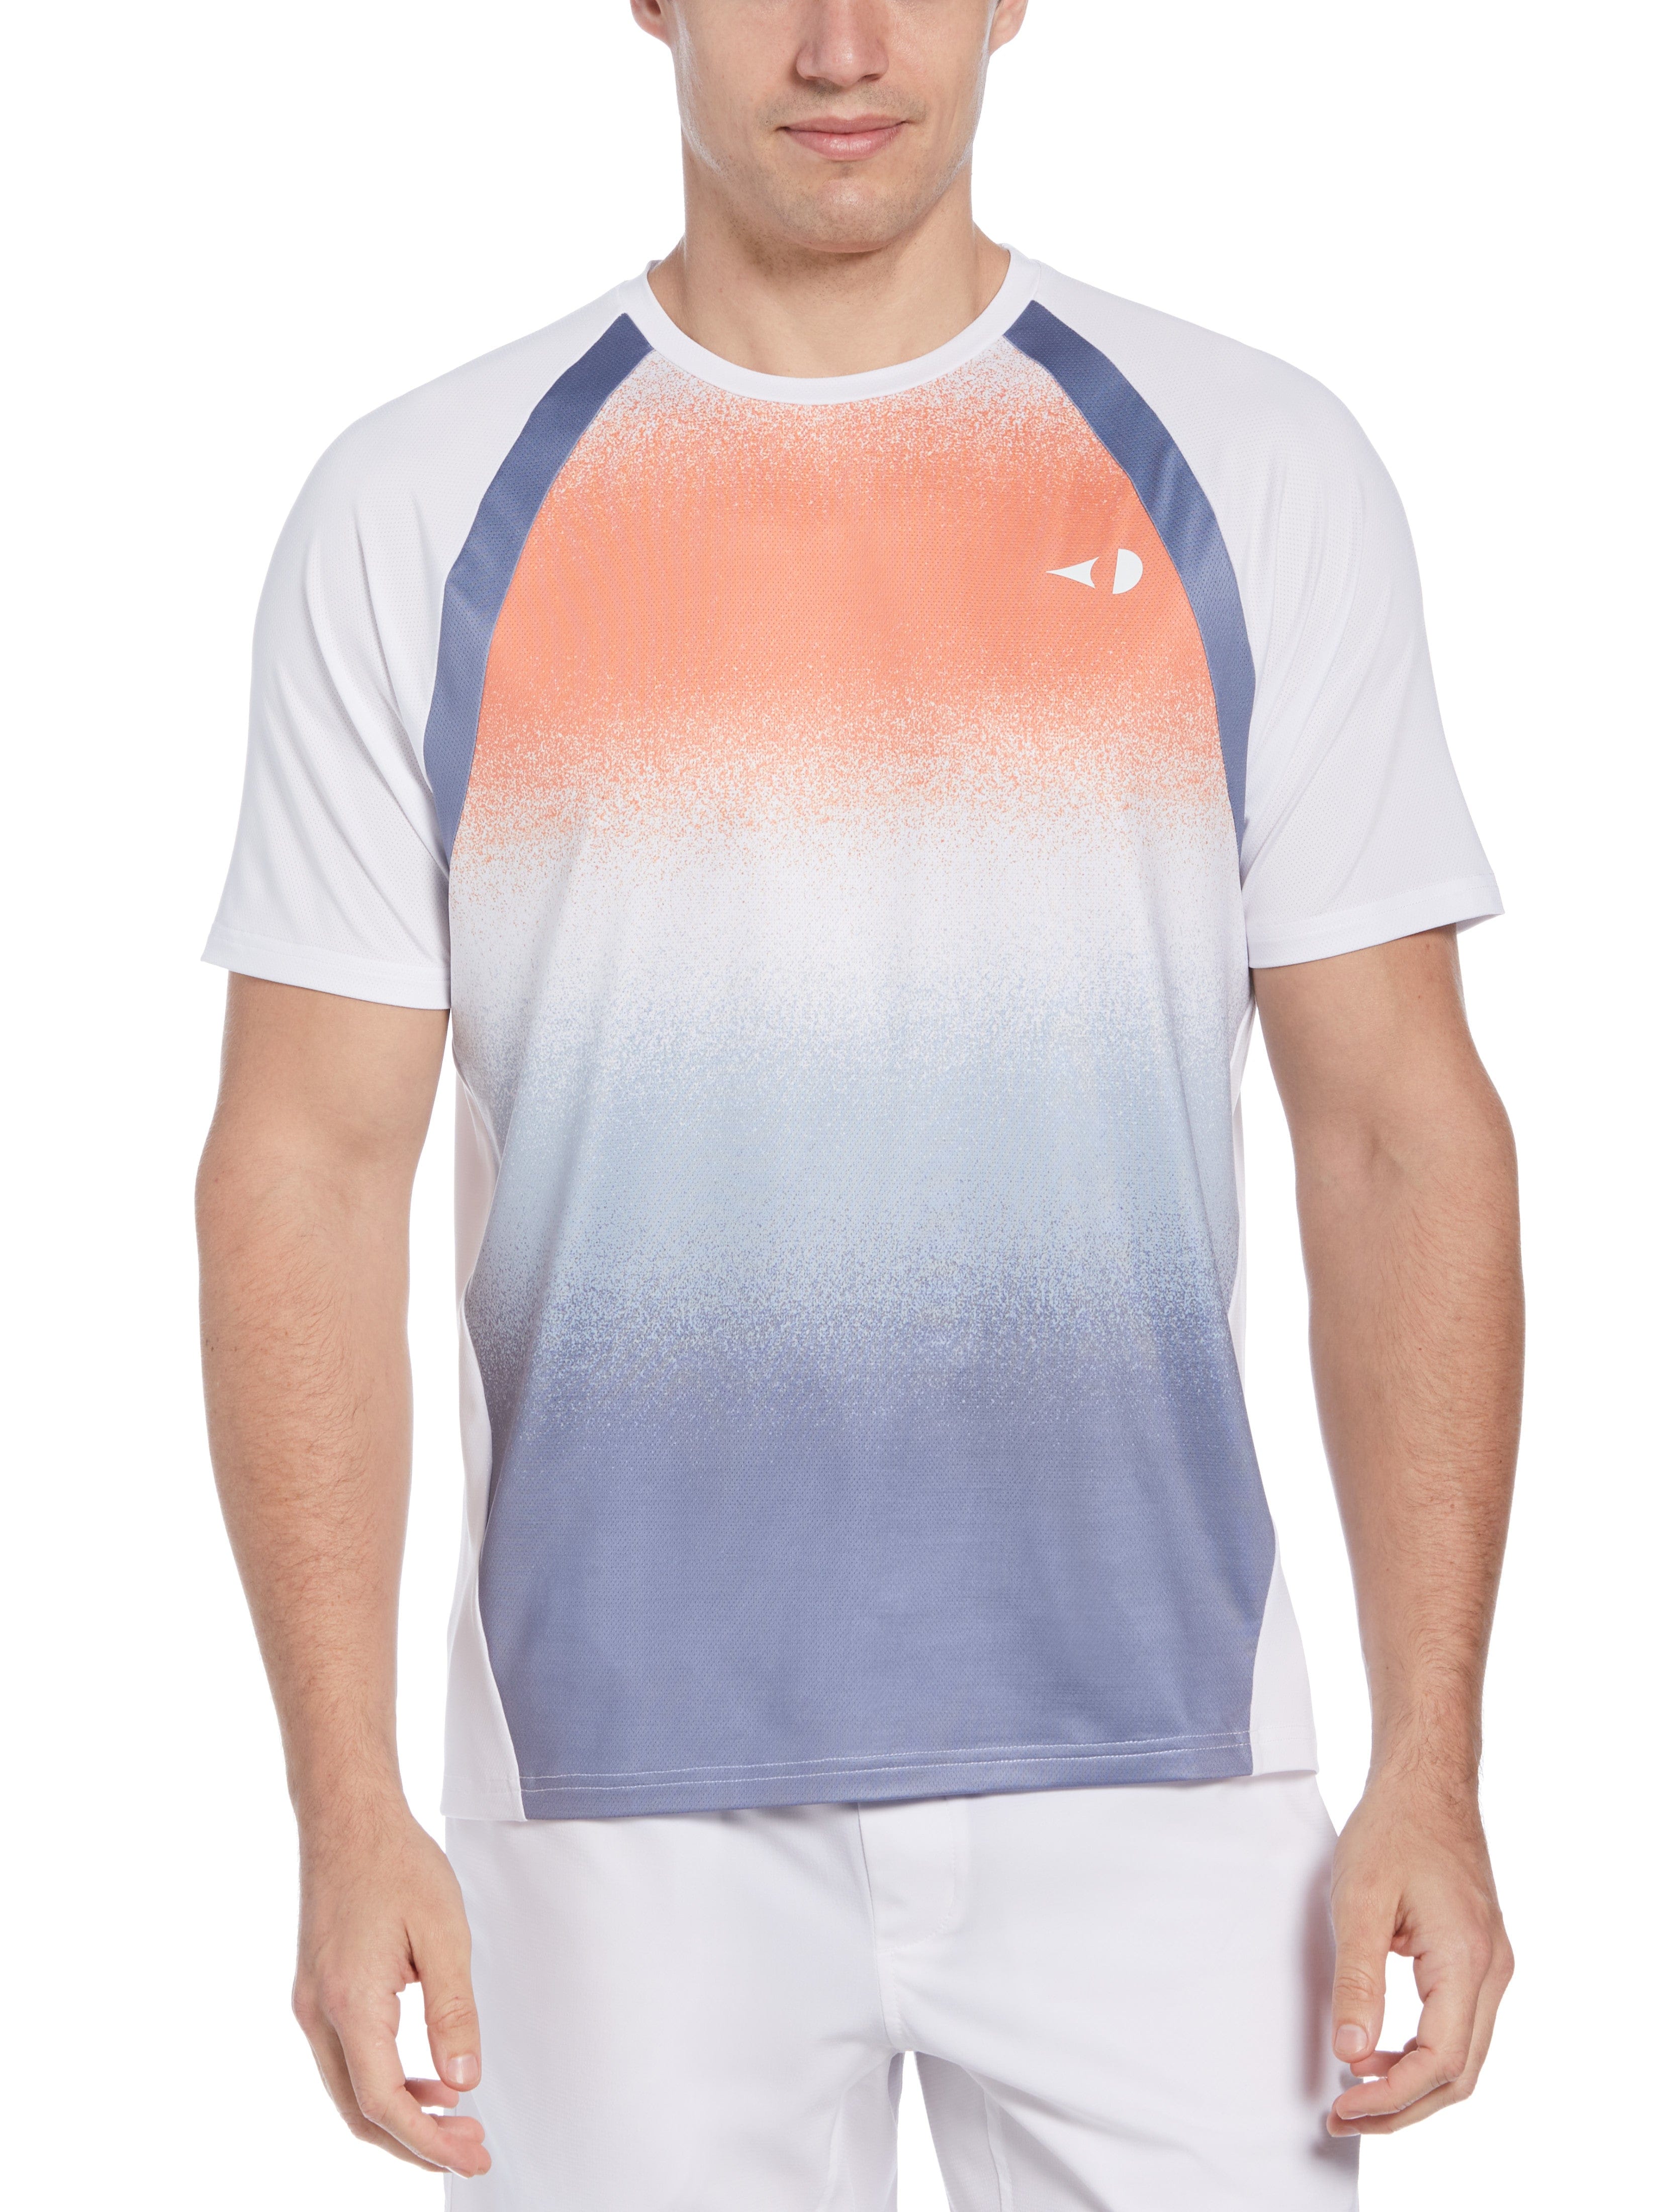 Grand Slam Mens Spray Gradient Printed Tennis T-Shirt, Size Small, Bright Wh/Candied Yams White, Polyester/Spandex | Golf Apparel Shop